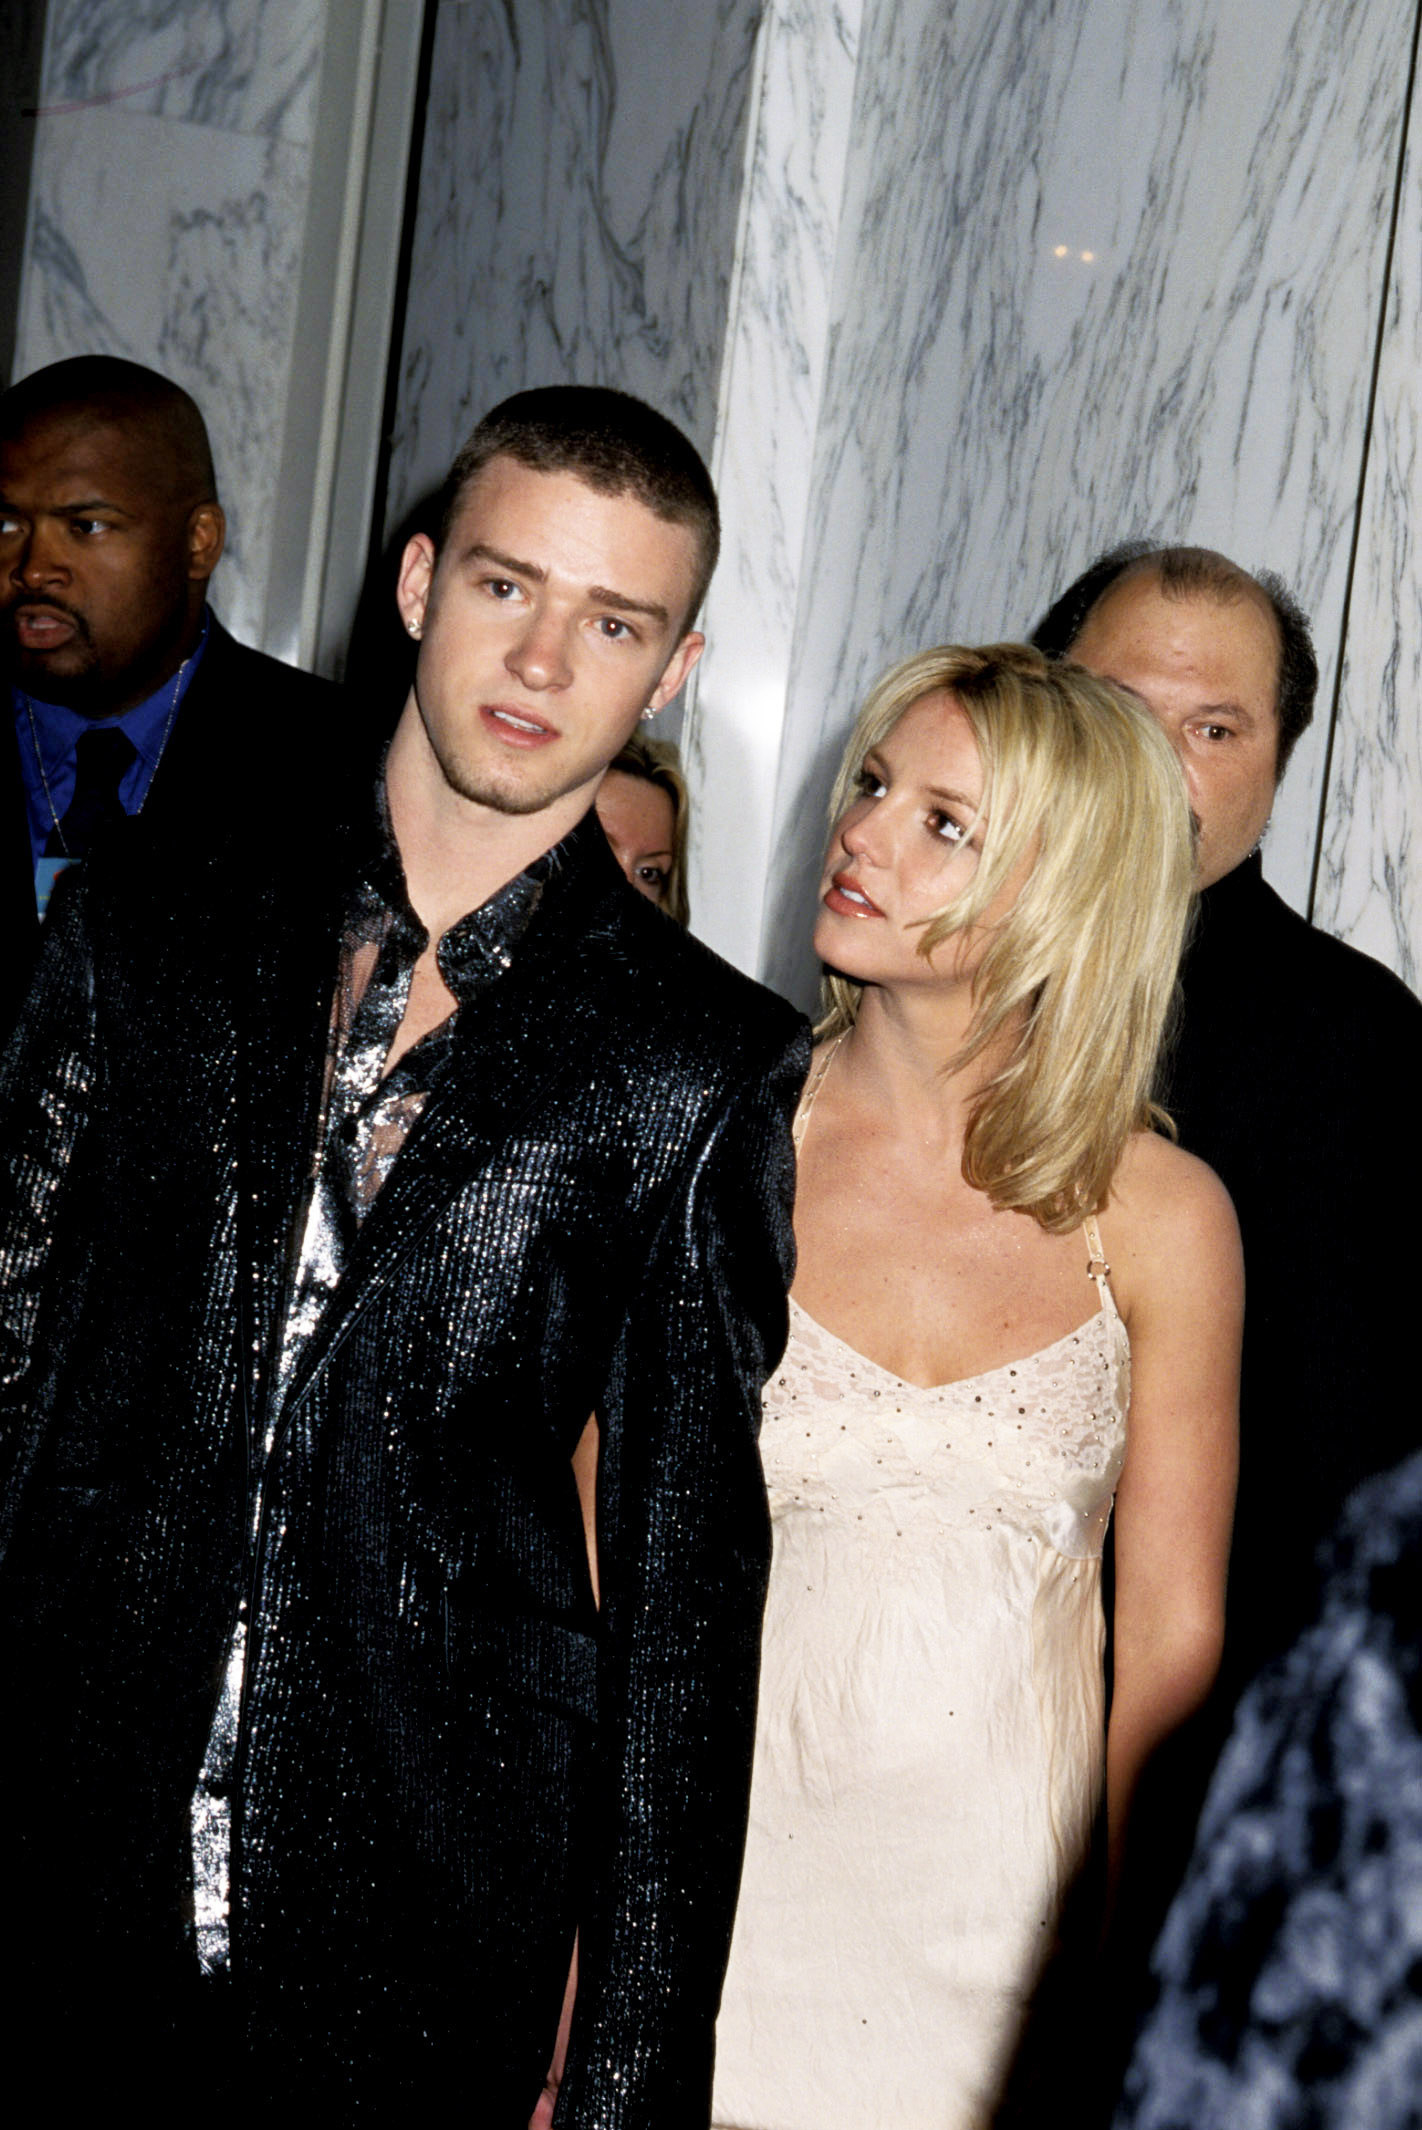 Why is everyone mad at Justin Timberlake? Britney Spears breakup revisited